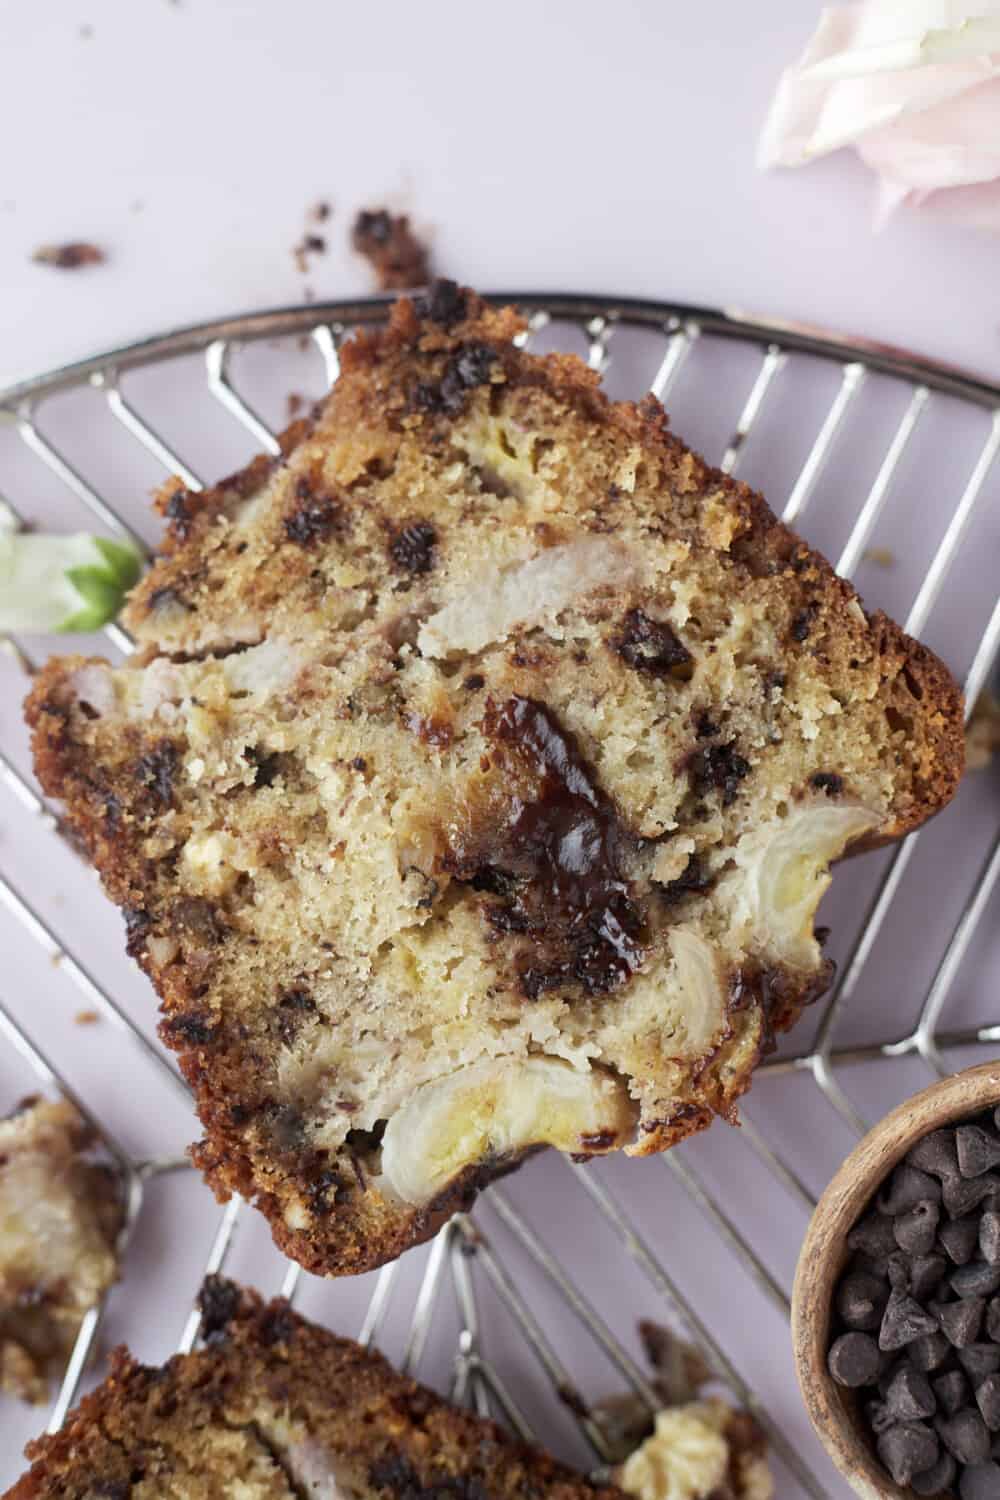 a slice of easy banana bread with semi-sweet and white chocolate chips, walnuts, and banana pieces on a wire rack